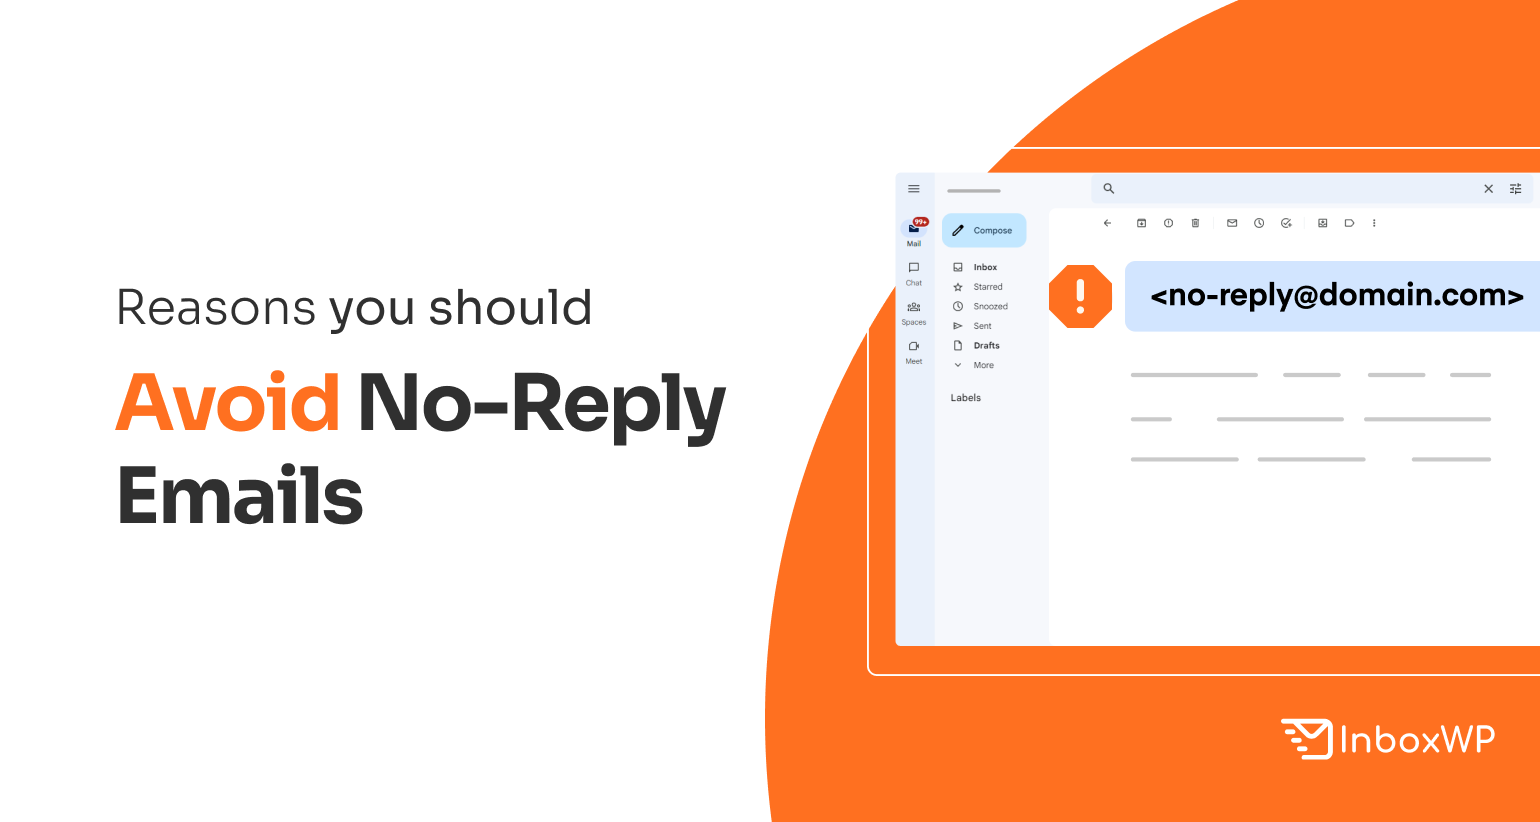 Reasons you should avoid no-reply emails and what are the best alternatives